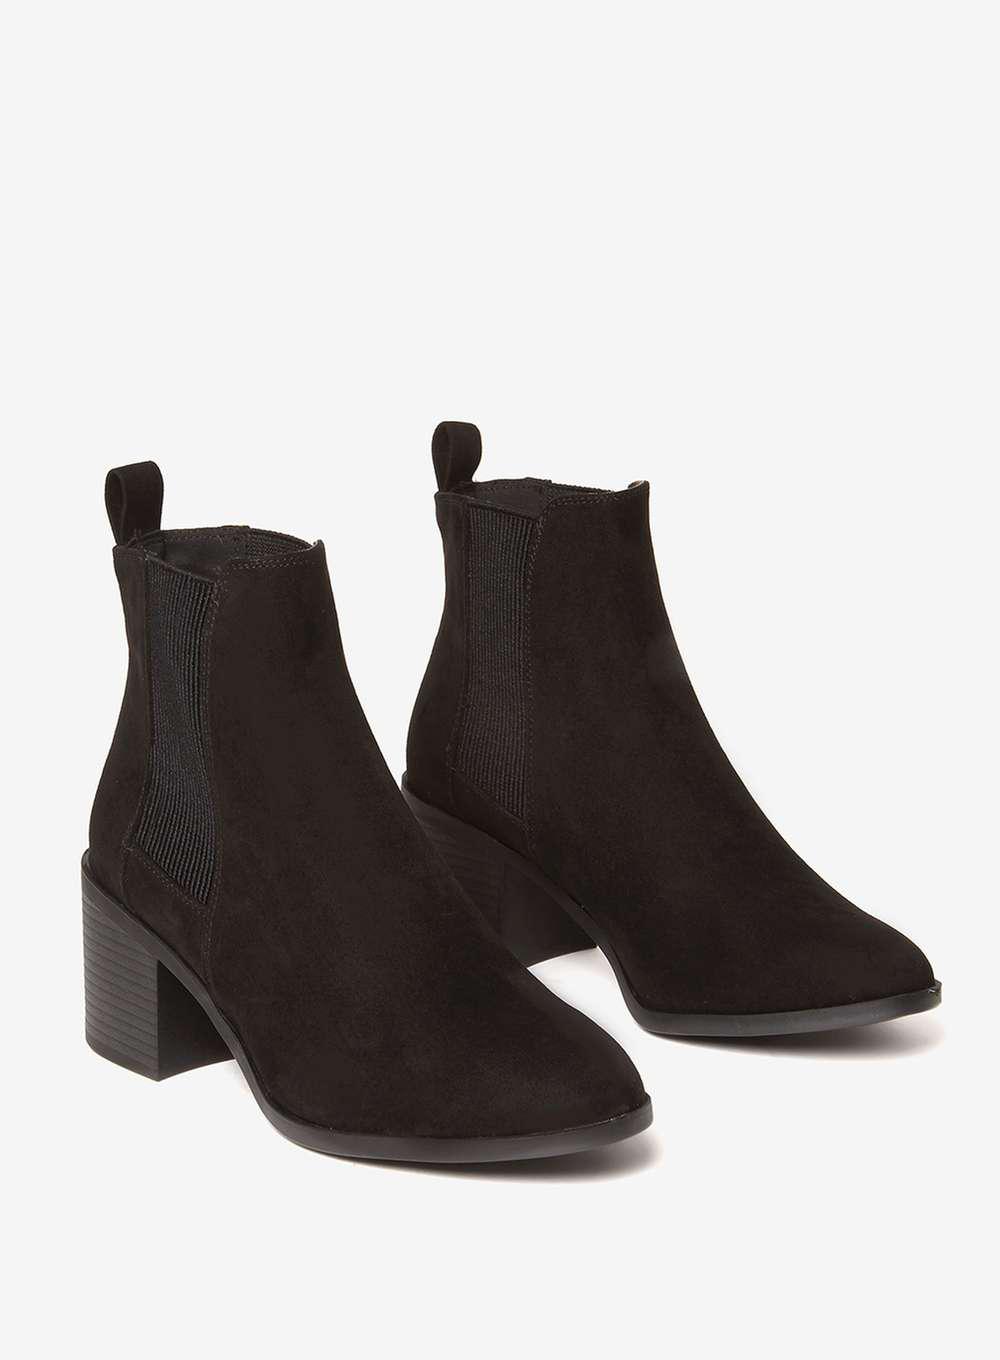 dorothy perkins black ankle boots